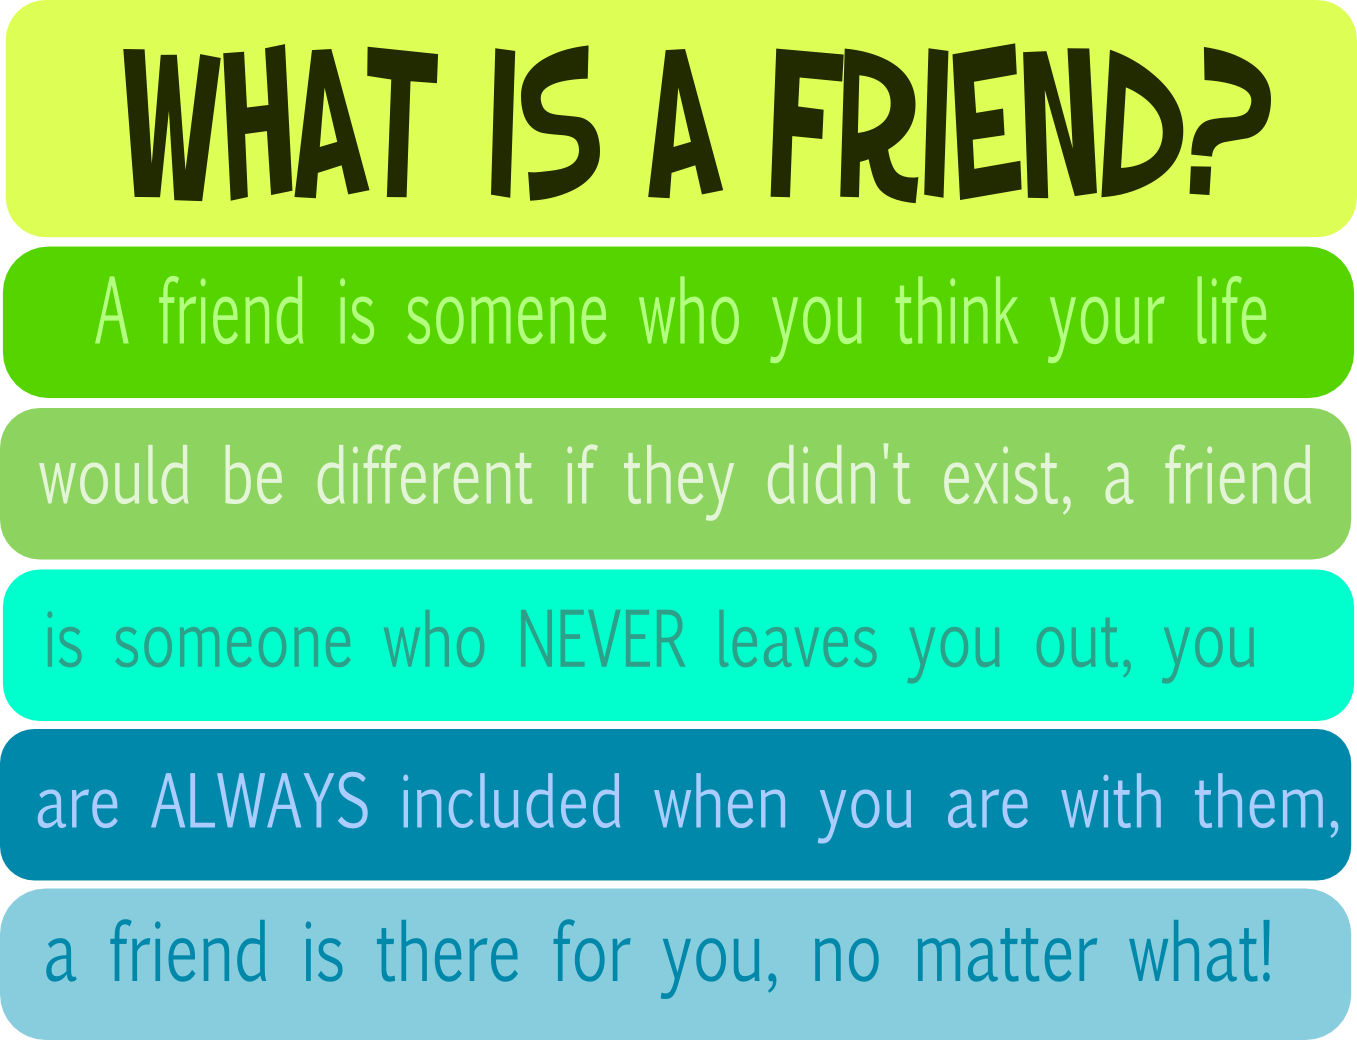 My friend had left. What is friends?. What is a good friend?. What is Friendship. Best friend is.